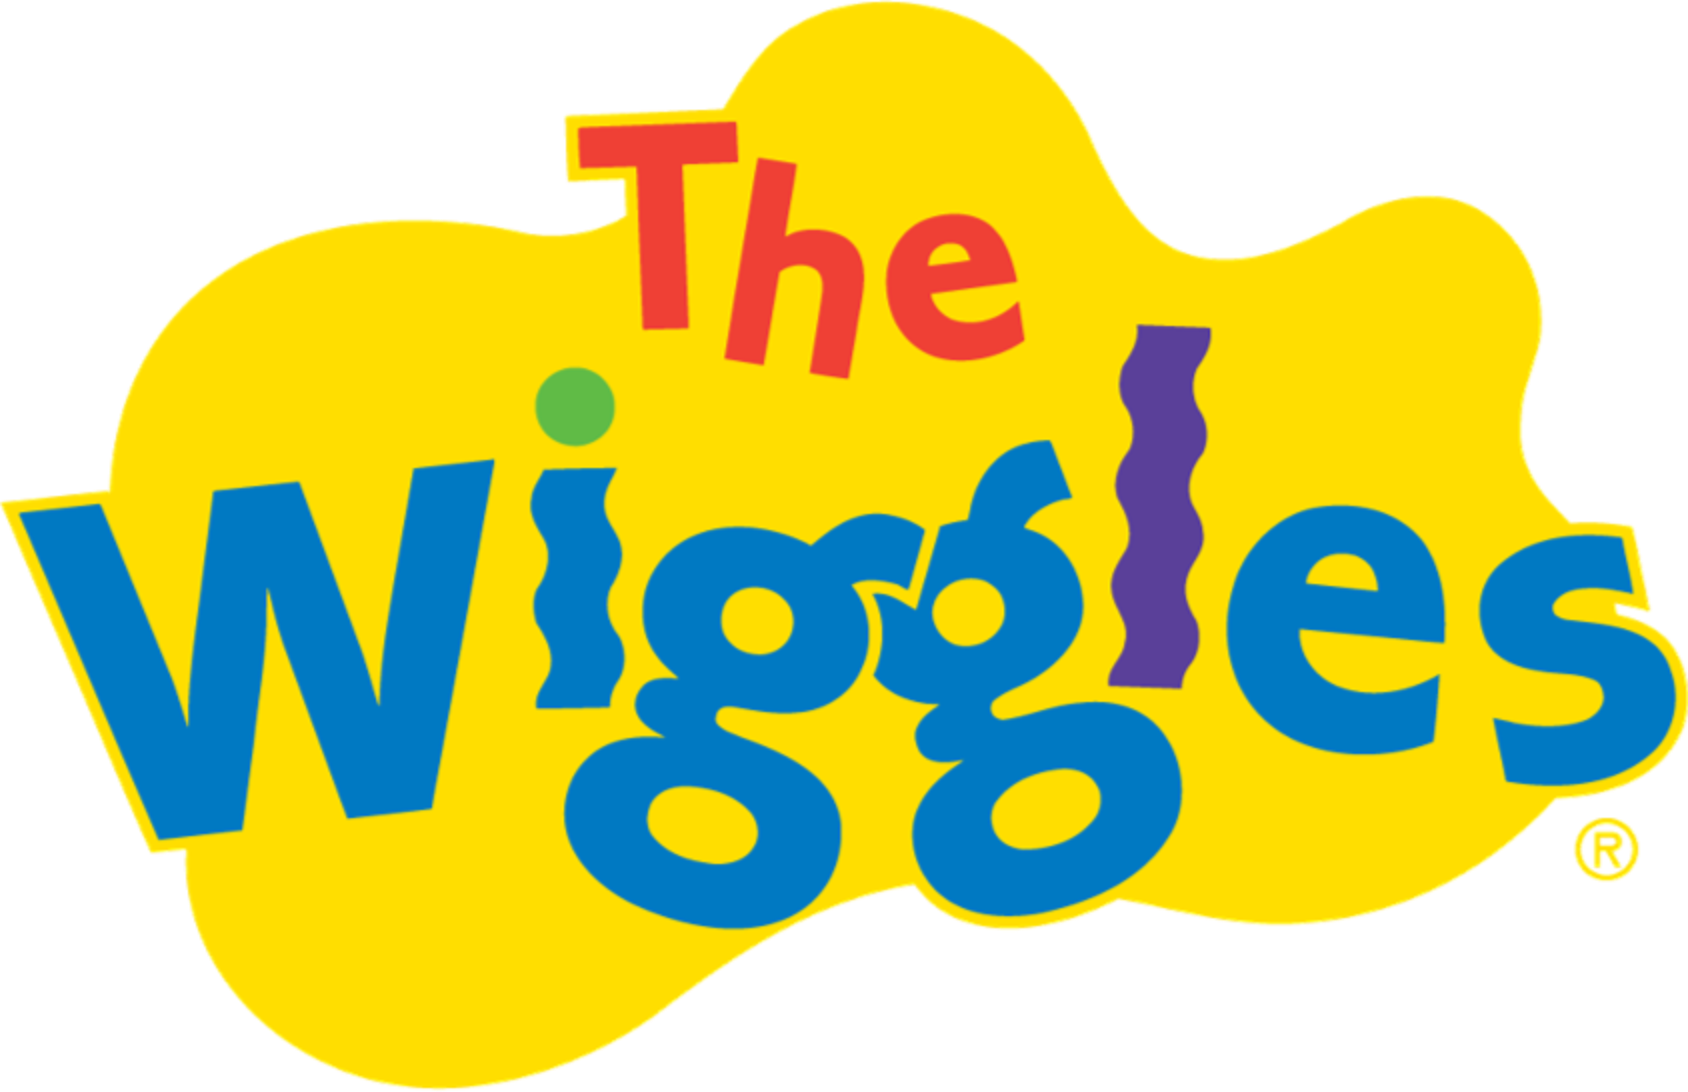 The Wiggles Volume 1 and 2 